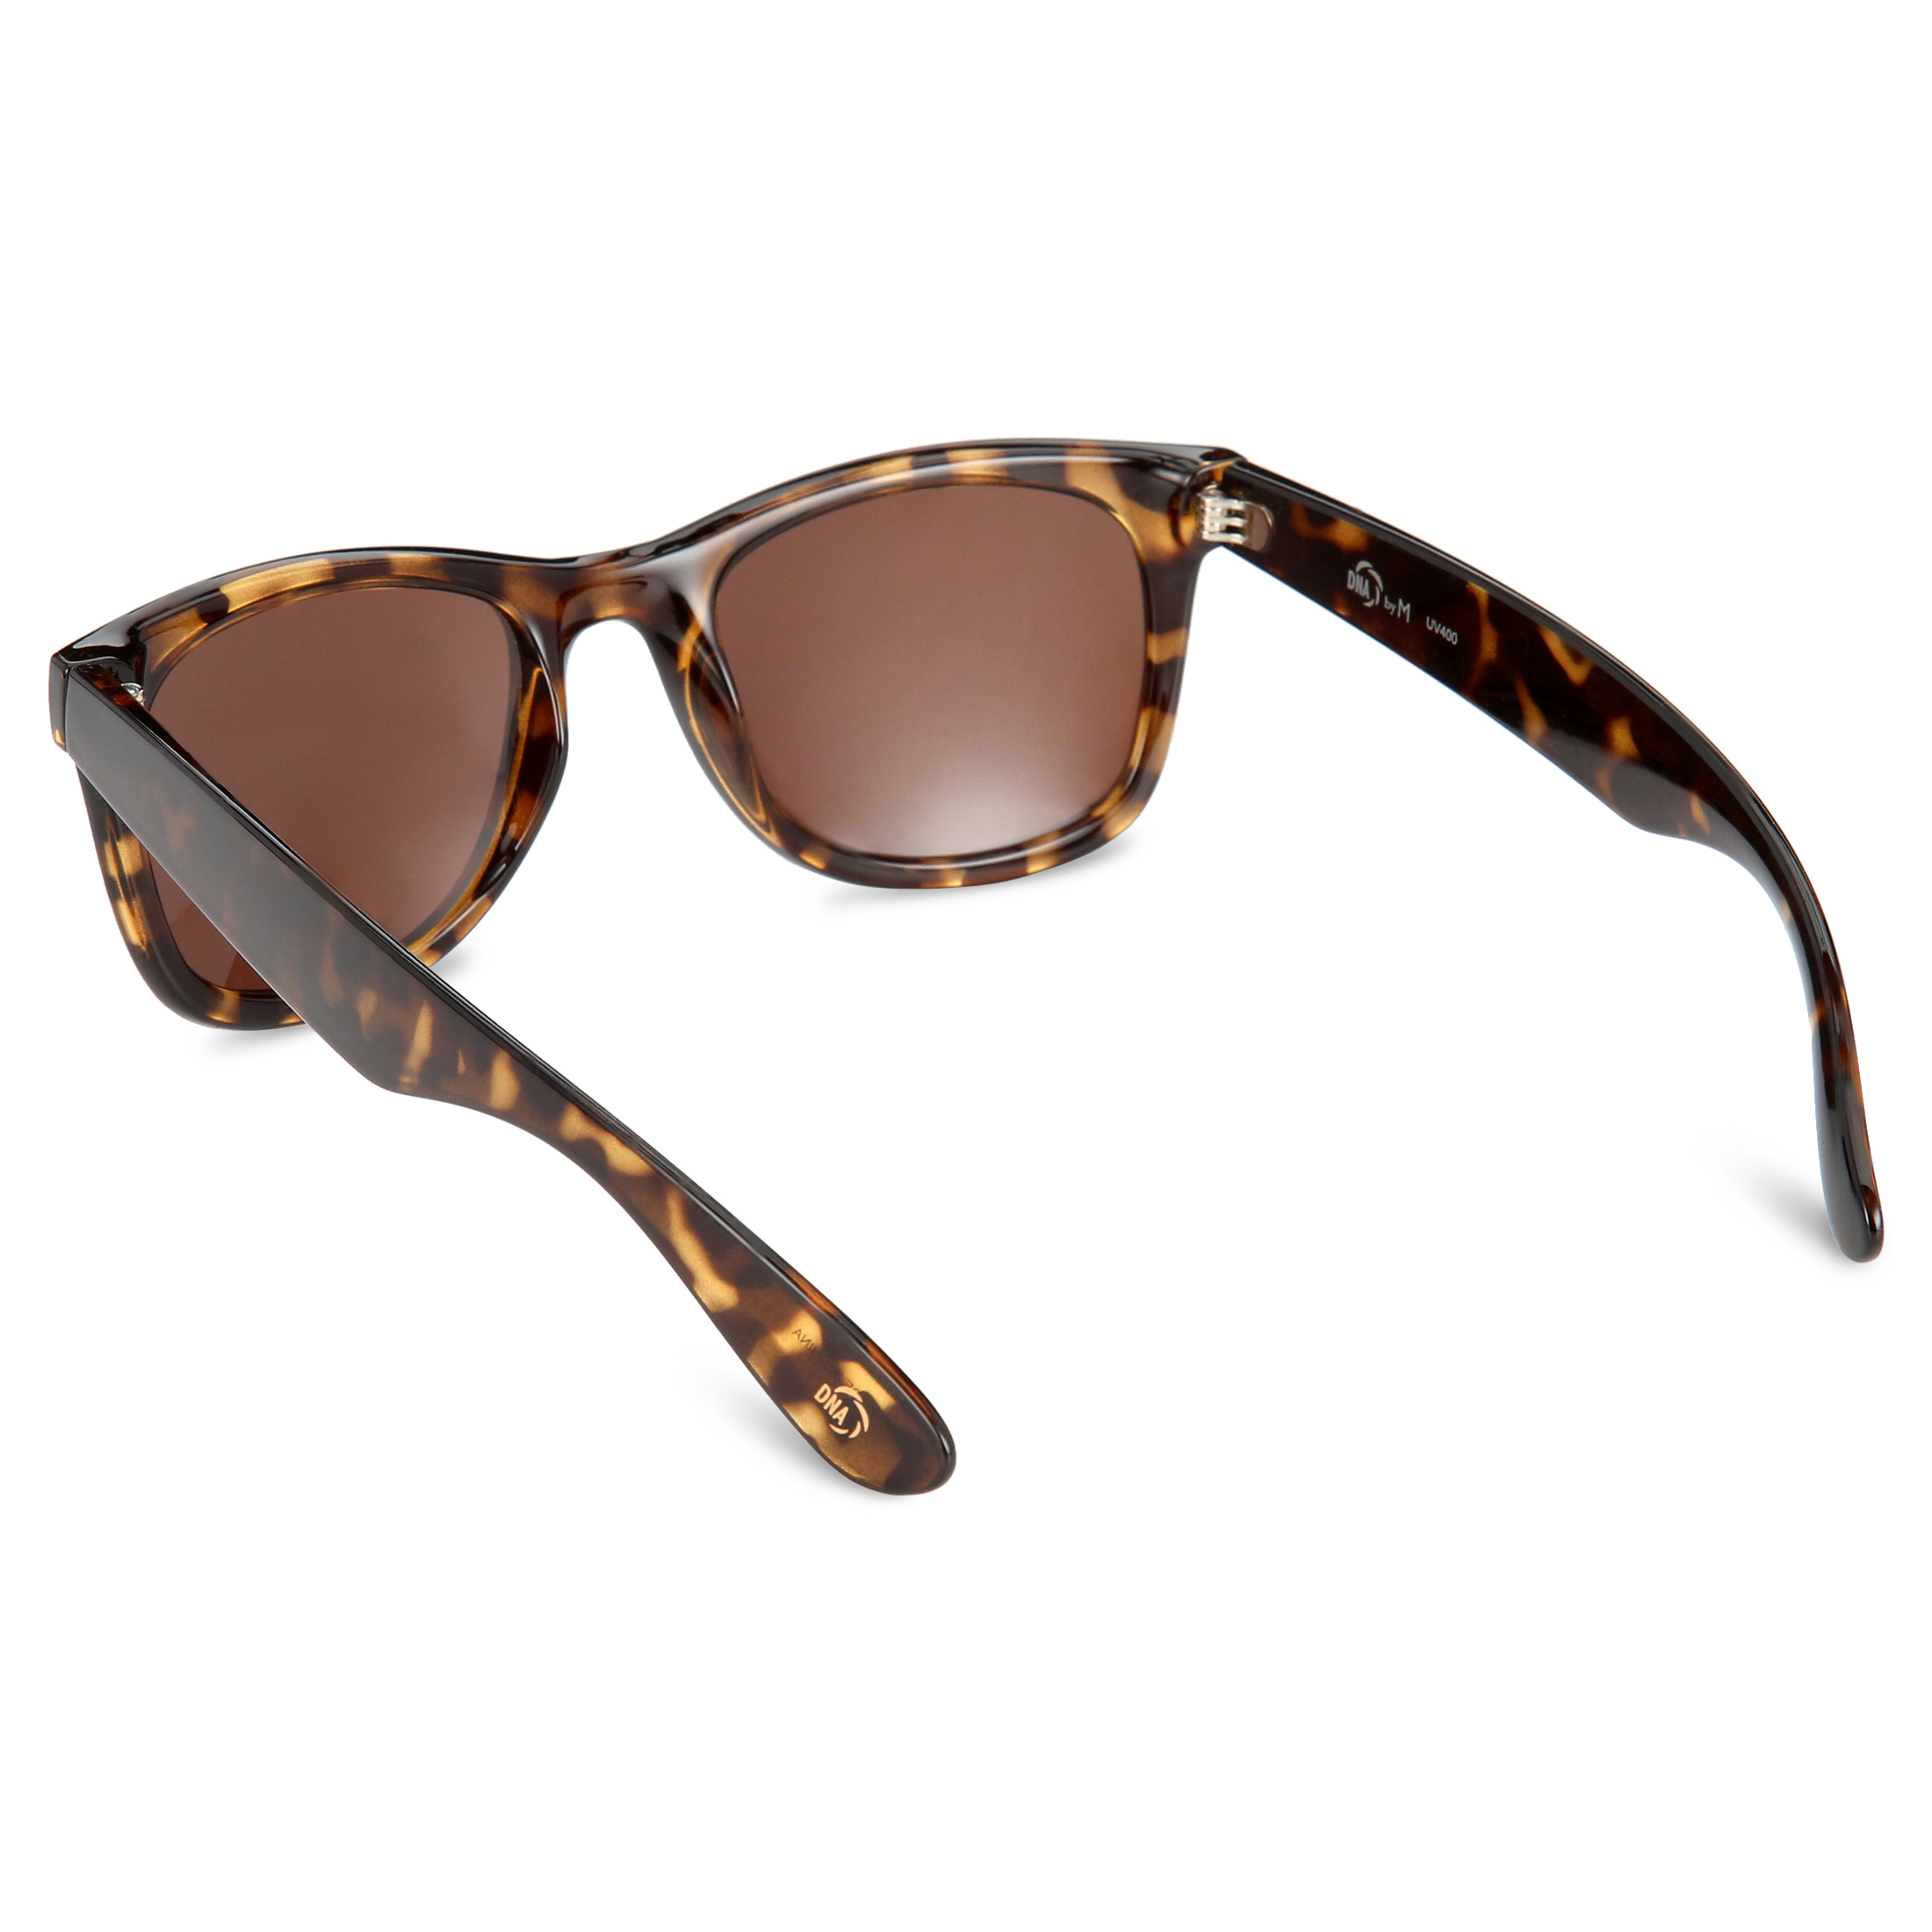 DNA Womens Rx'able Sunglasses, A2008, Tortoise, 50-21-148 - image 5 of 6